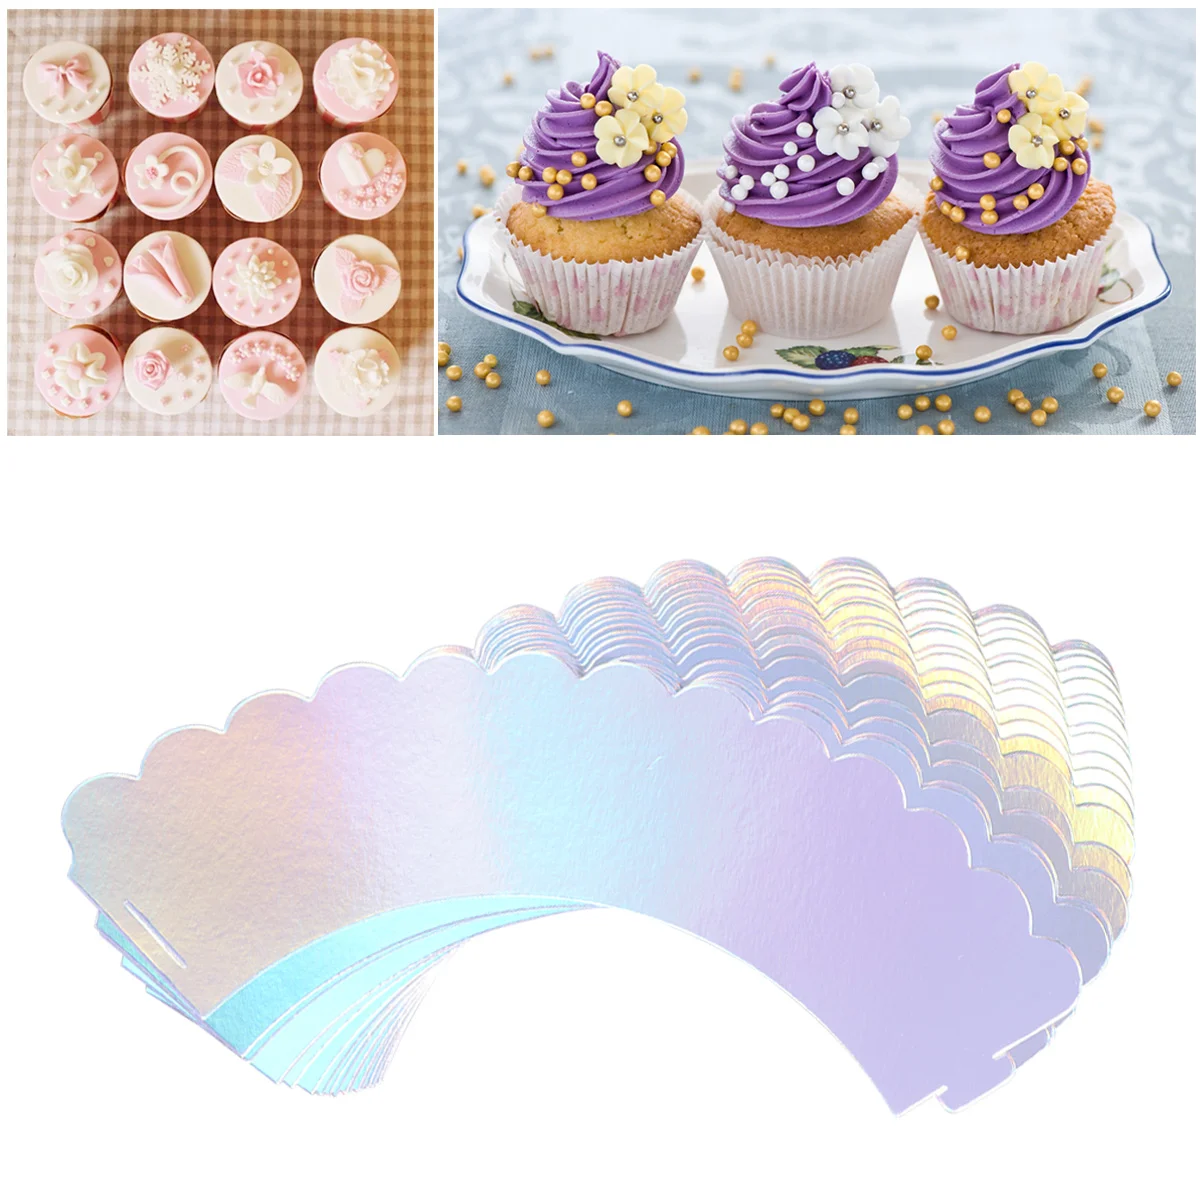 

24pcs Iridescent Rainbow Cupcake Wrappers Cupcake Liners Muffins Holder Decoration for Baby Shower Birthday Party